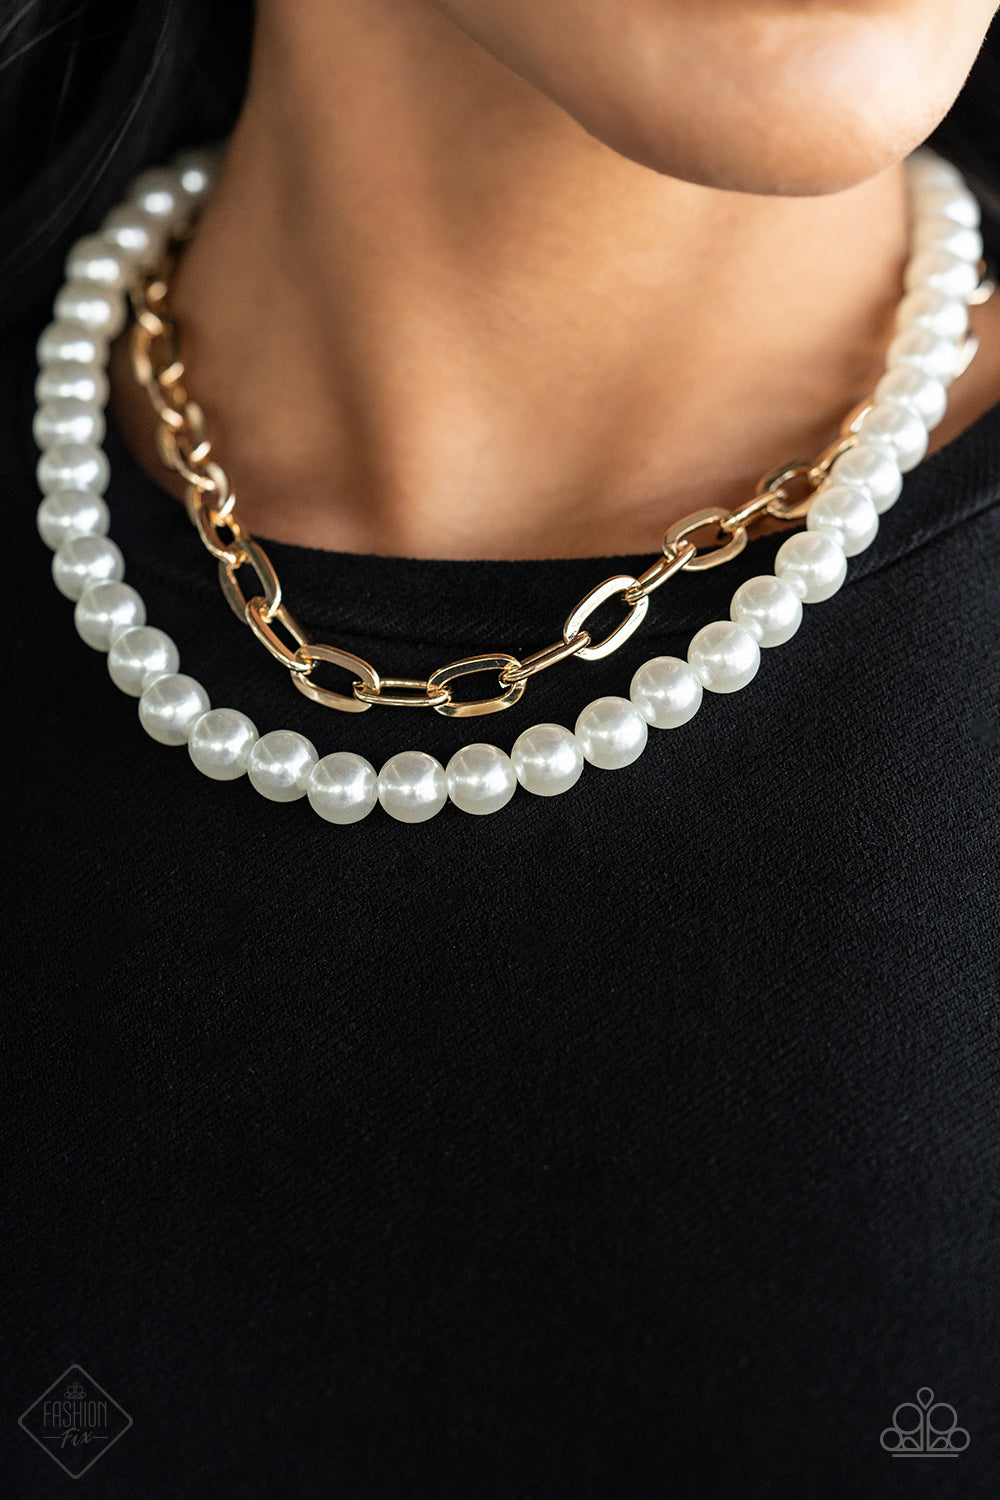 Suburban Yacht Club- Gold/Pearl Necklace And Earrings